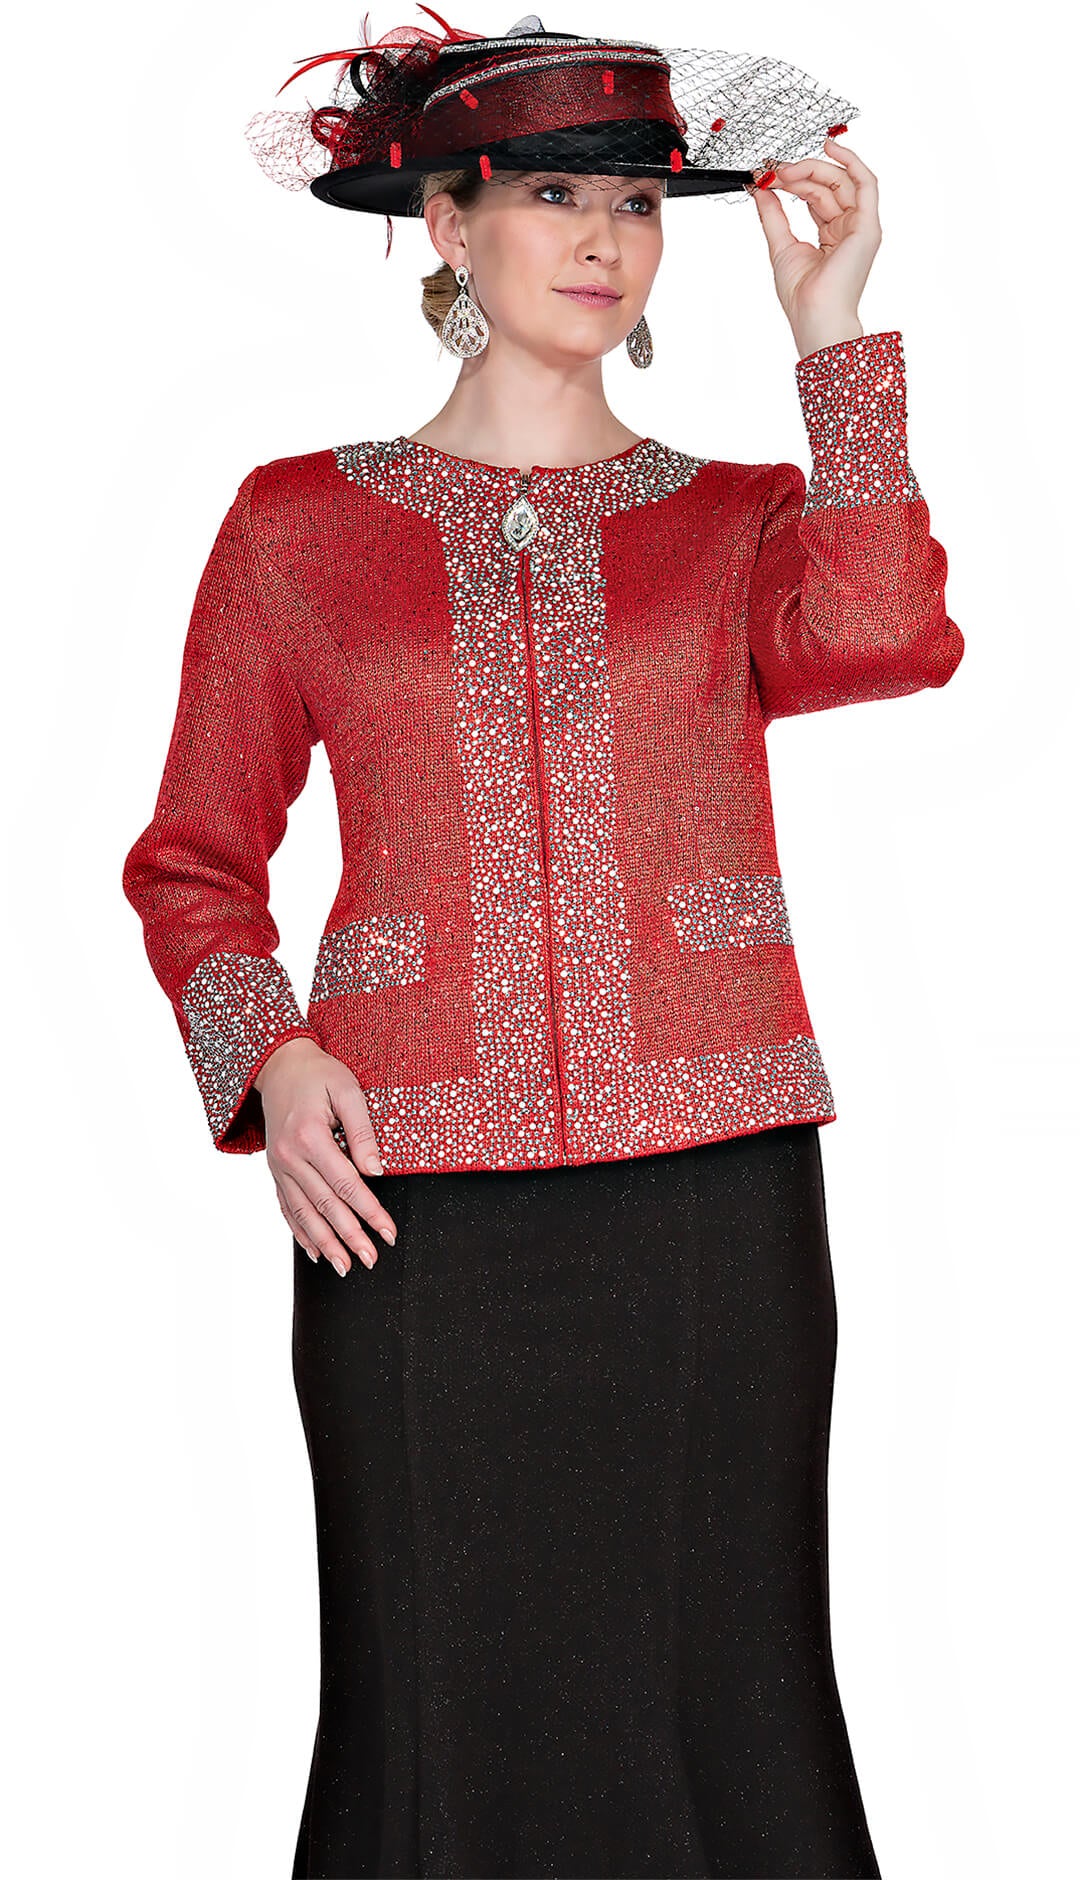 Elite Champagne Church Suit 5961-Red/Black - Church Suits For Less